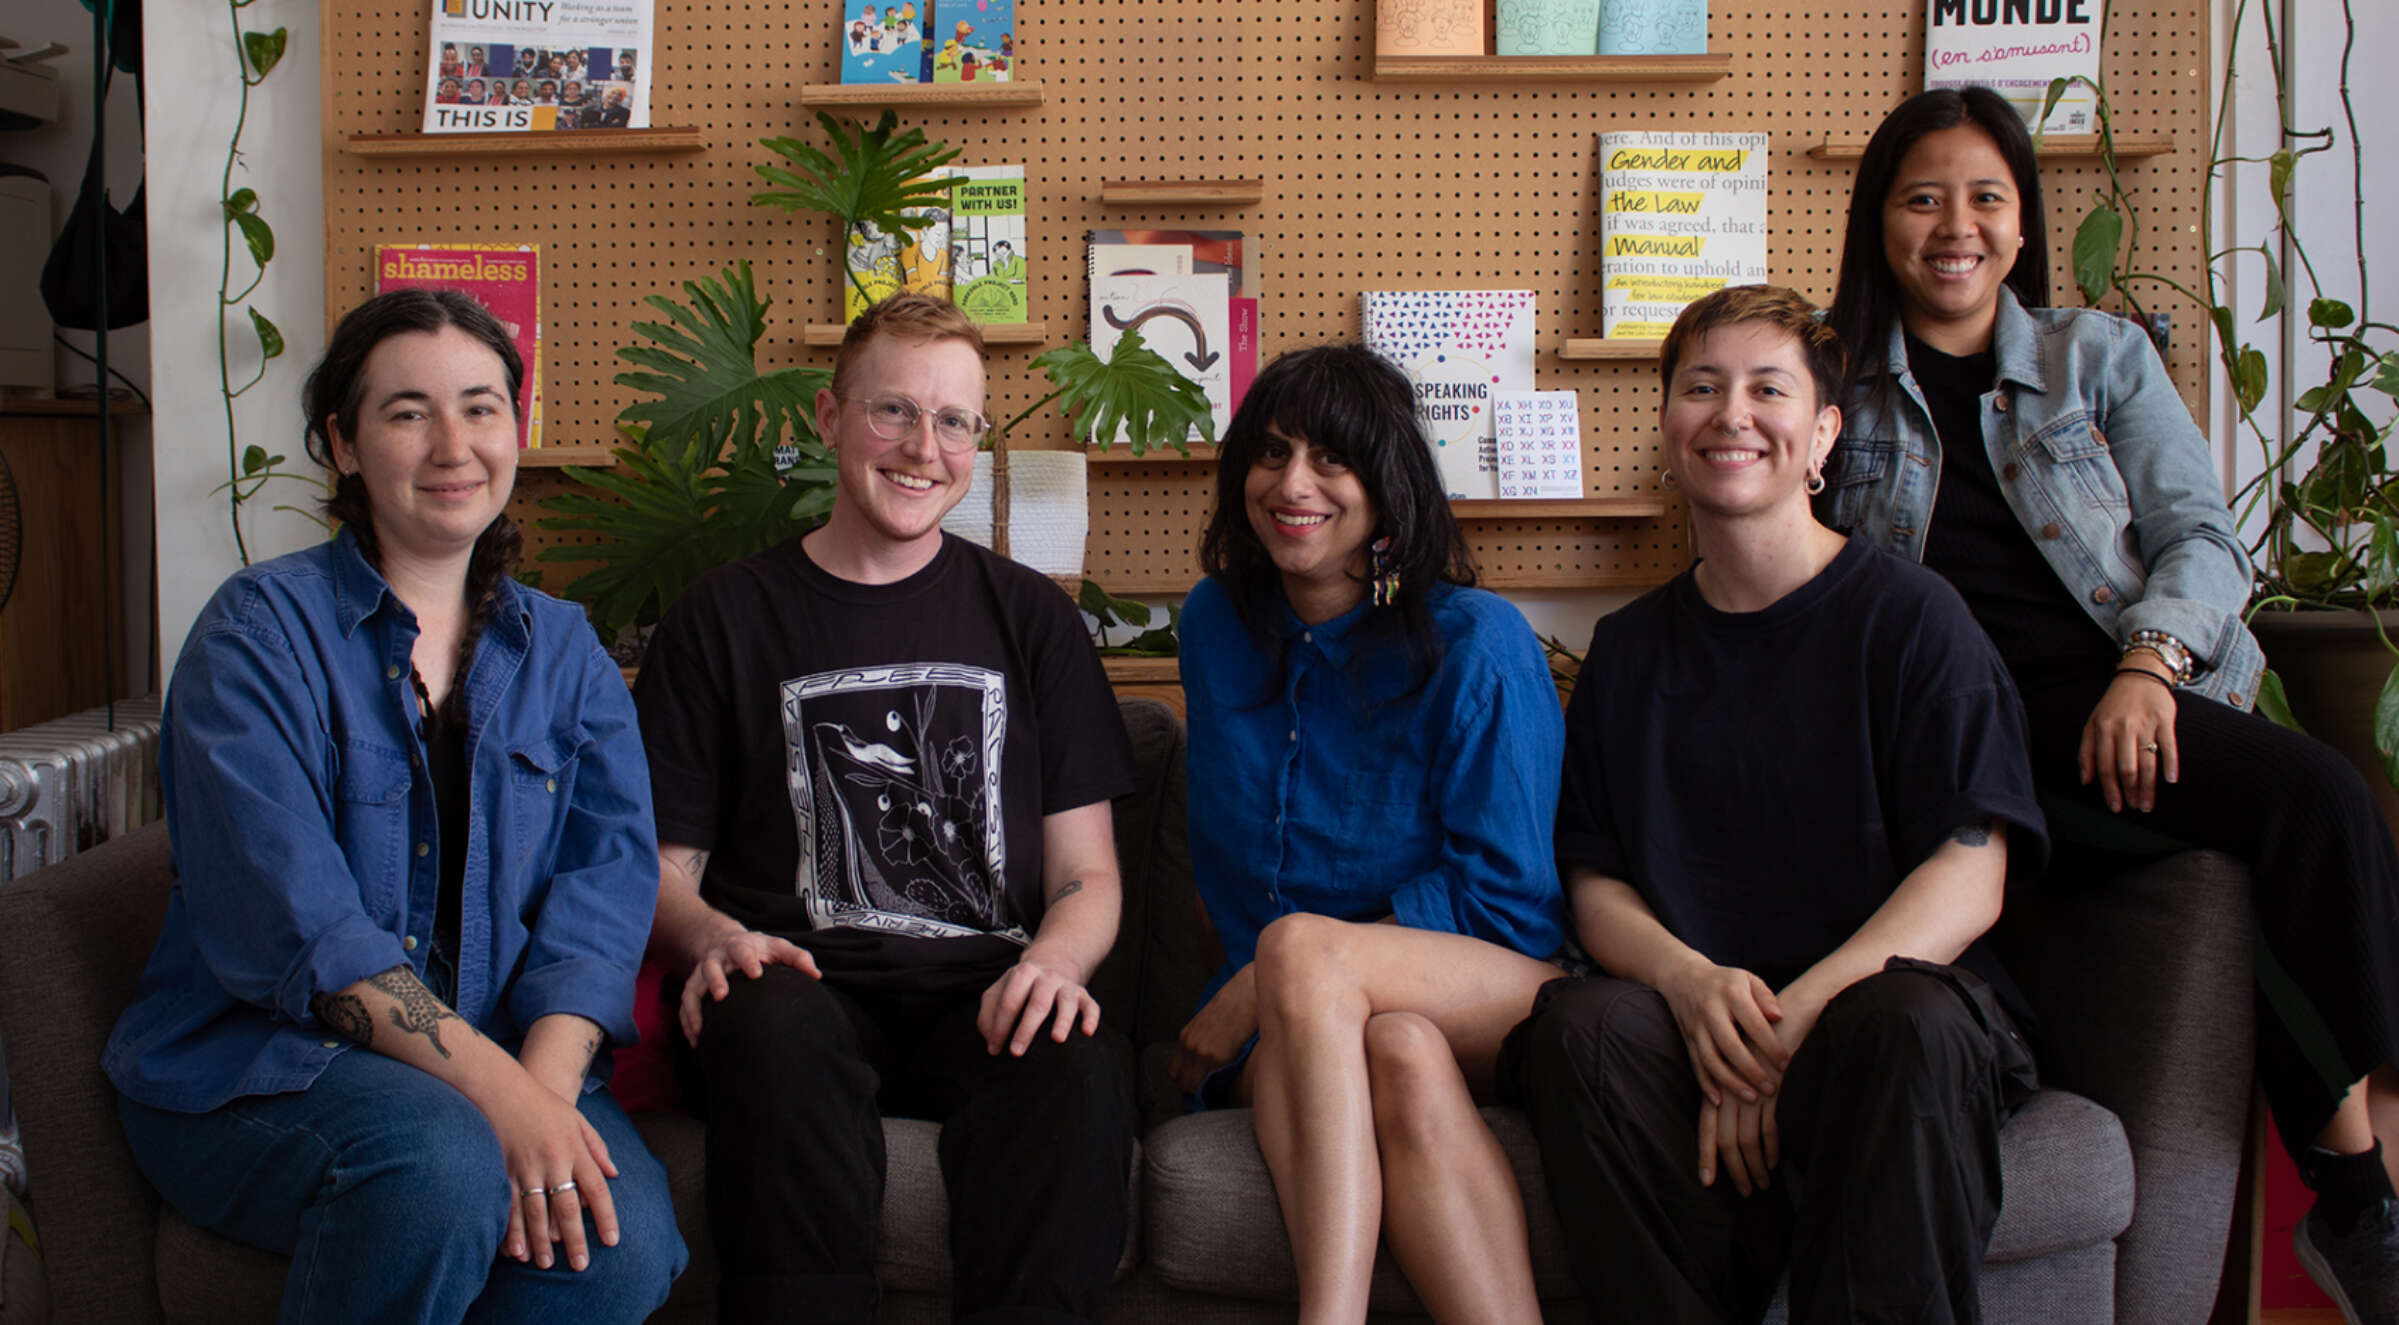 A group of five people sits on a sofa, smiling for the camera. Behind them is a pegboard wall with books, plants, and various items on display. The setting appears cozy and creative, with greenery and warm lighting contributing to a welcoming atmosphere.